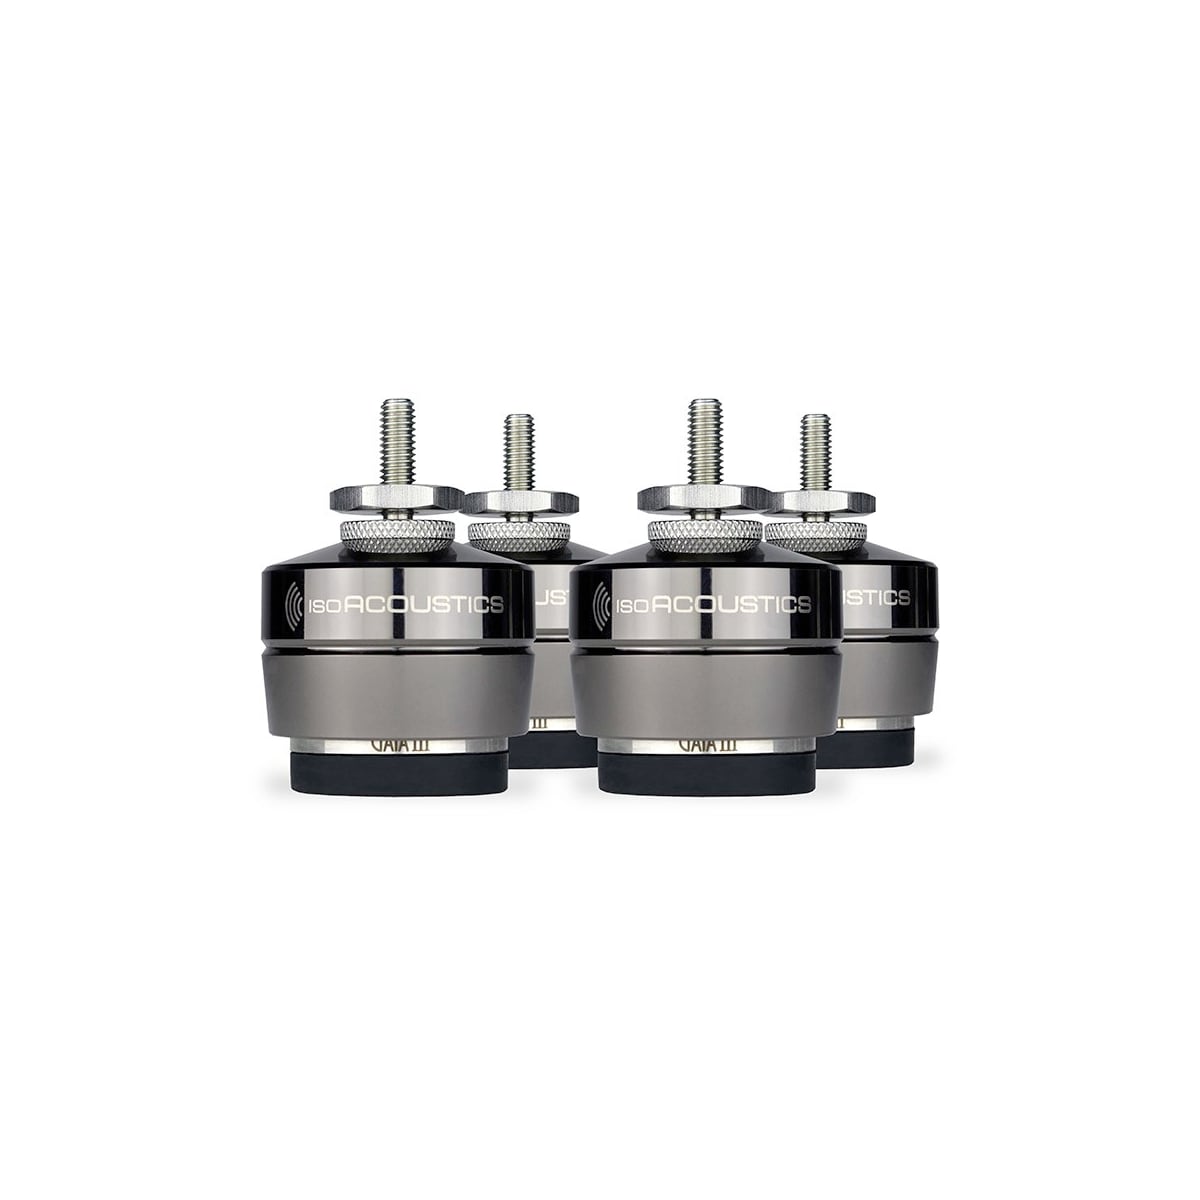 isoACOUSTICS GAIA III Stainless Steel Acoustic Isolation Stands (SET OF 4)